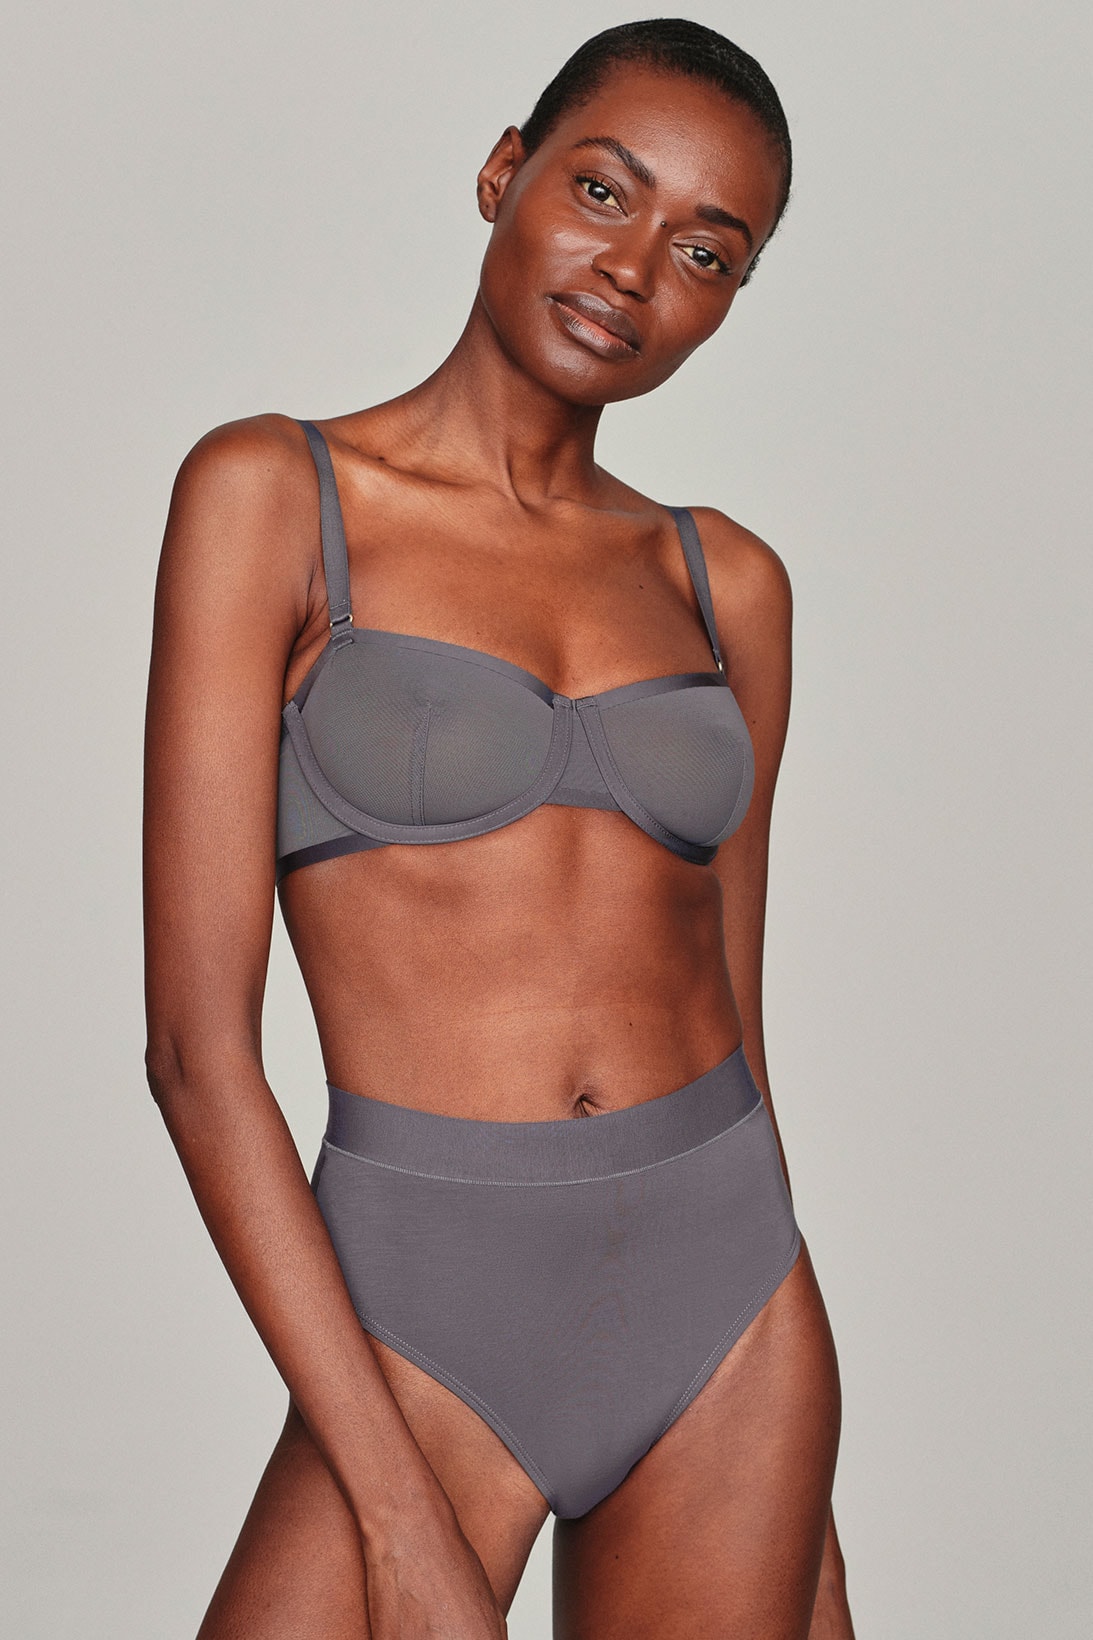 CUUP Launches New Mars & Slate Lingerie